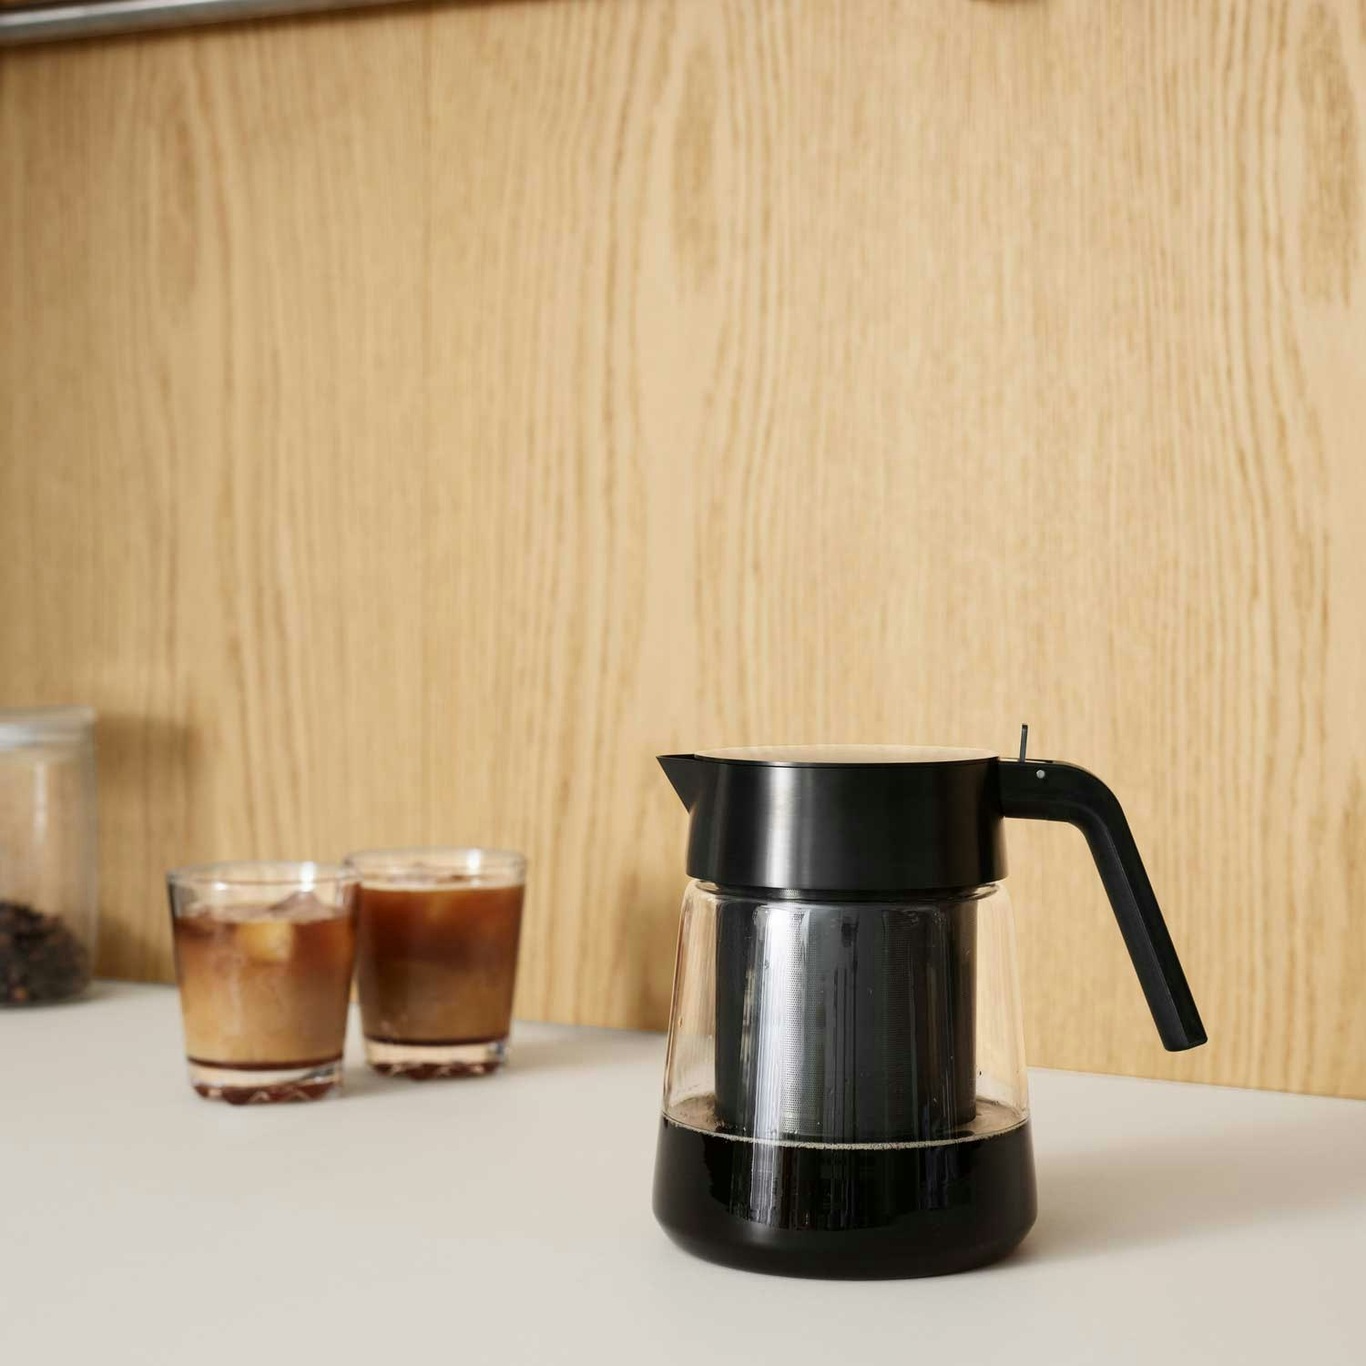 https://royaldesign.com/image/2/stelton-nohr-filter-for-cold-brew-coffee-4?w=800&quality=80